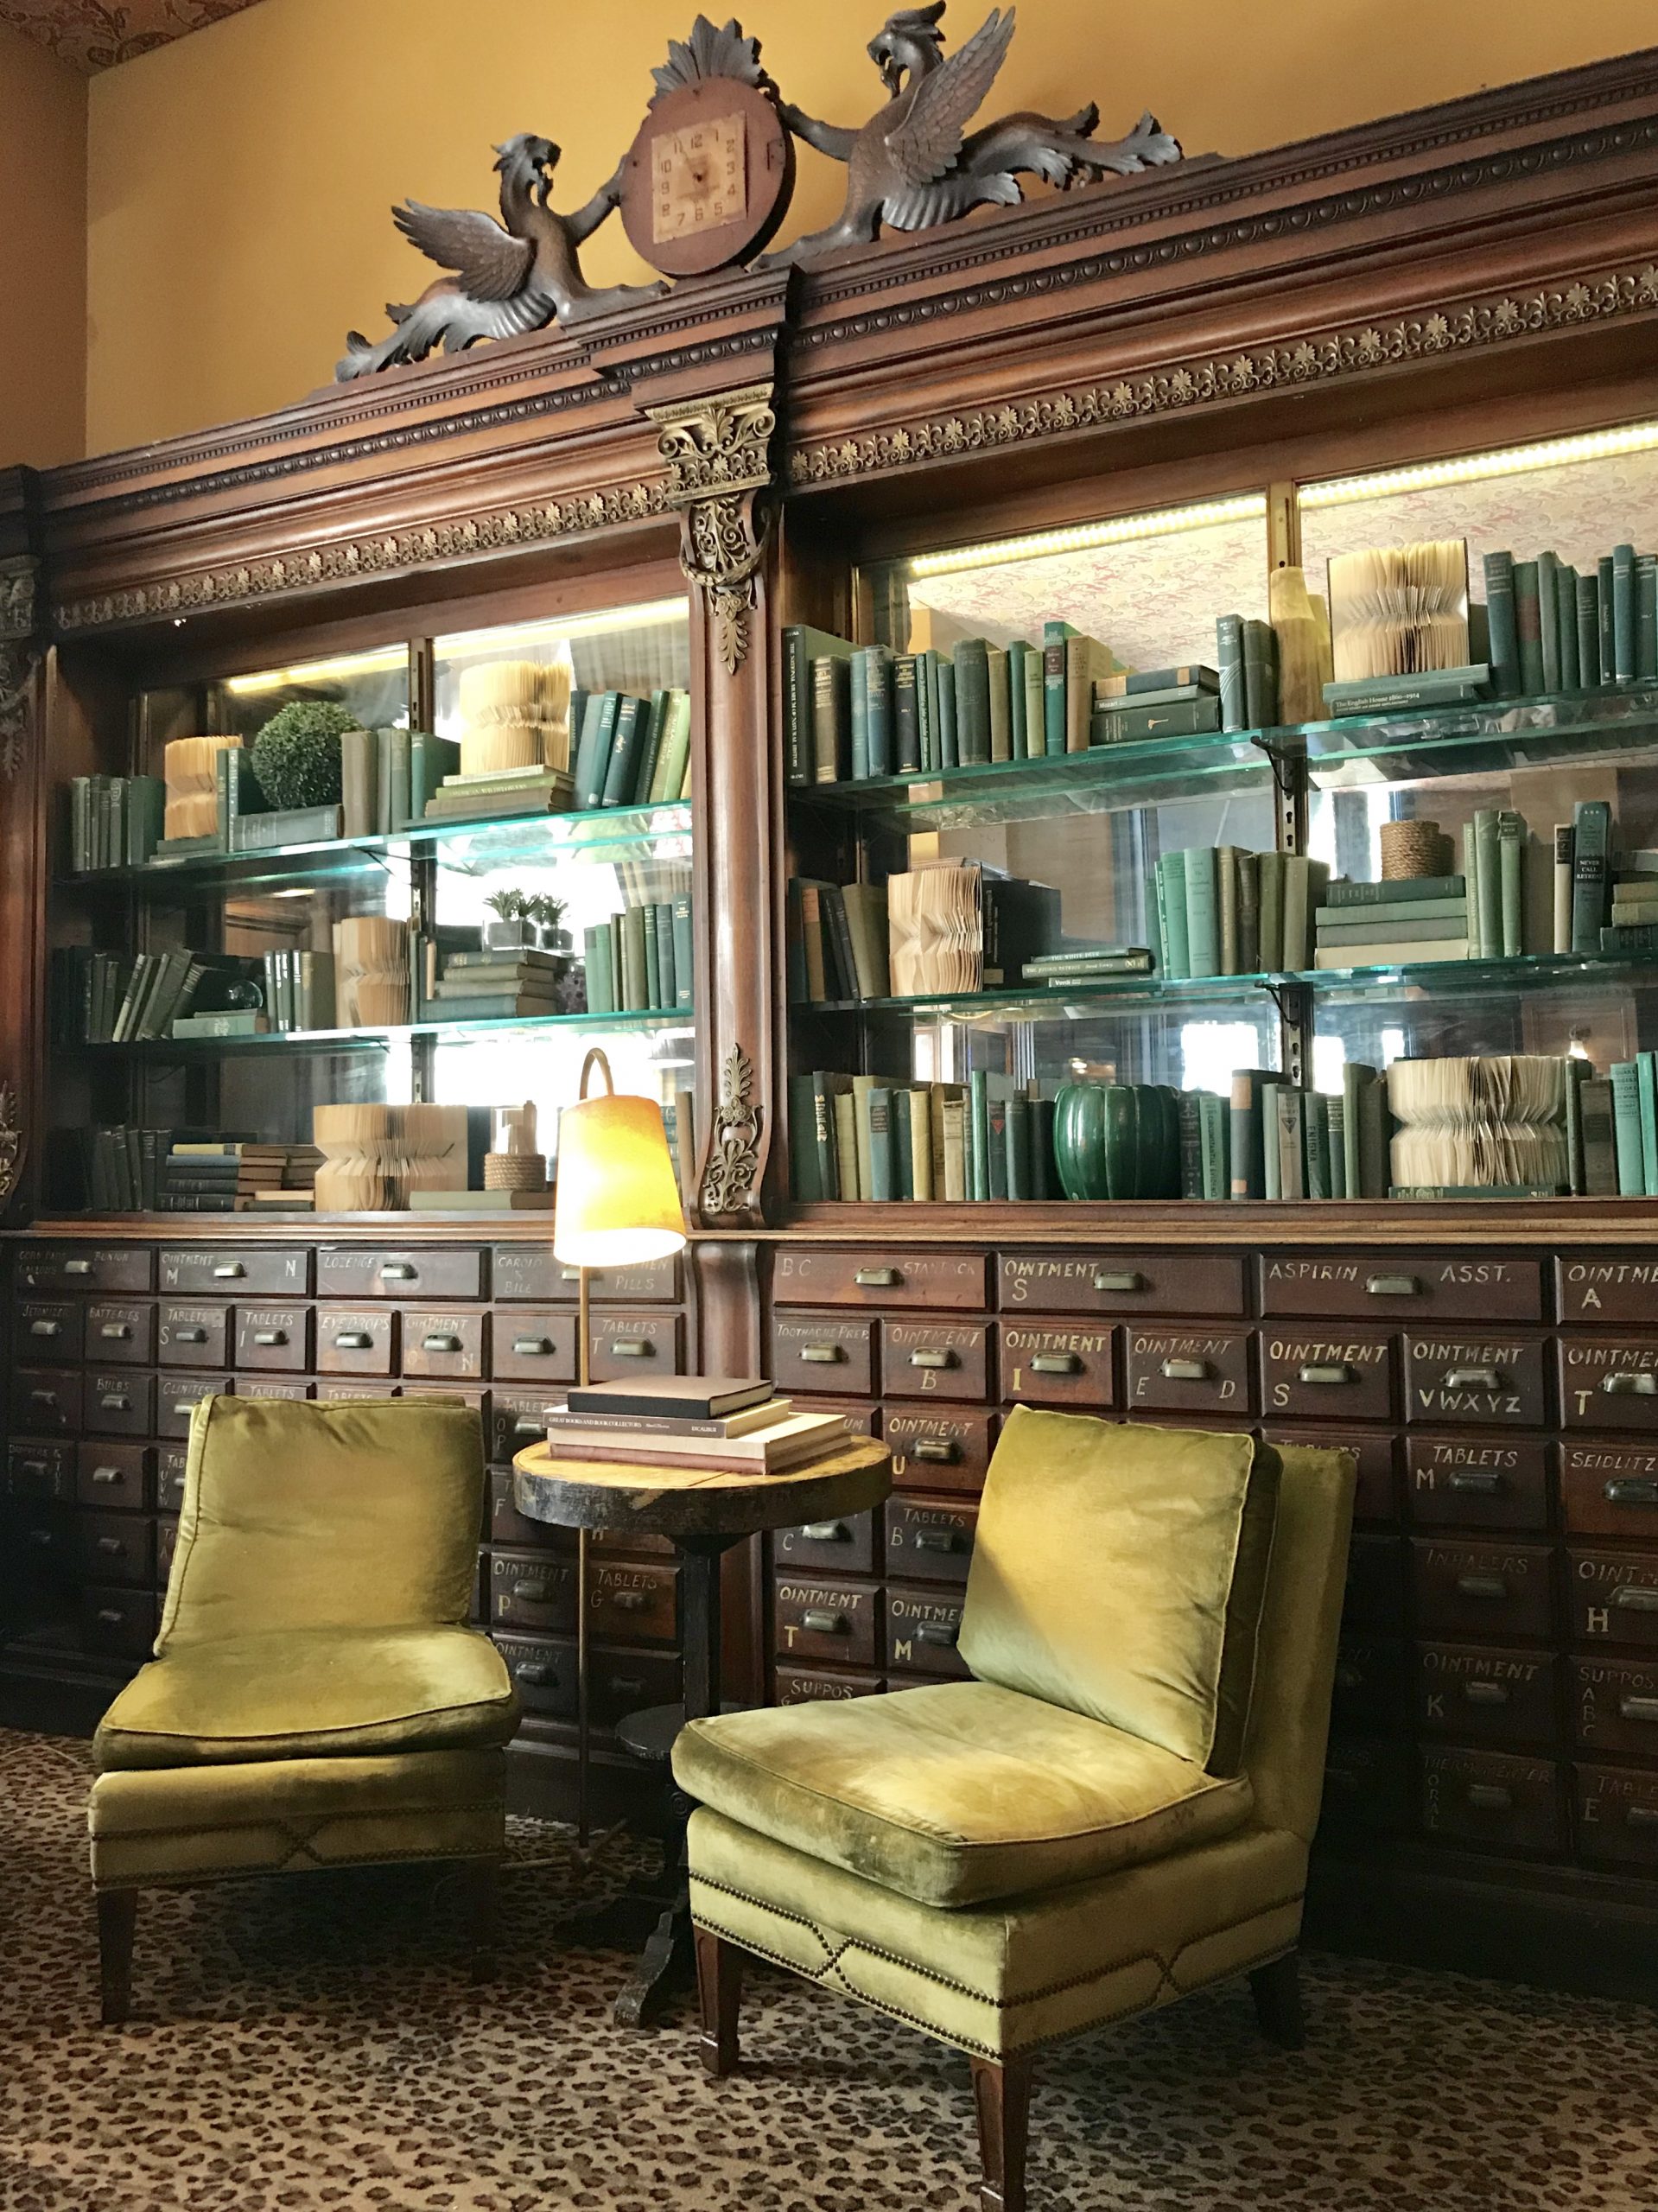 interior of gryphon tea room - things to do in savannah ga with kids